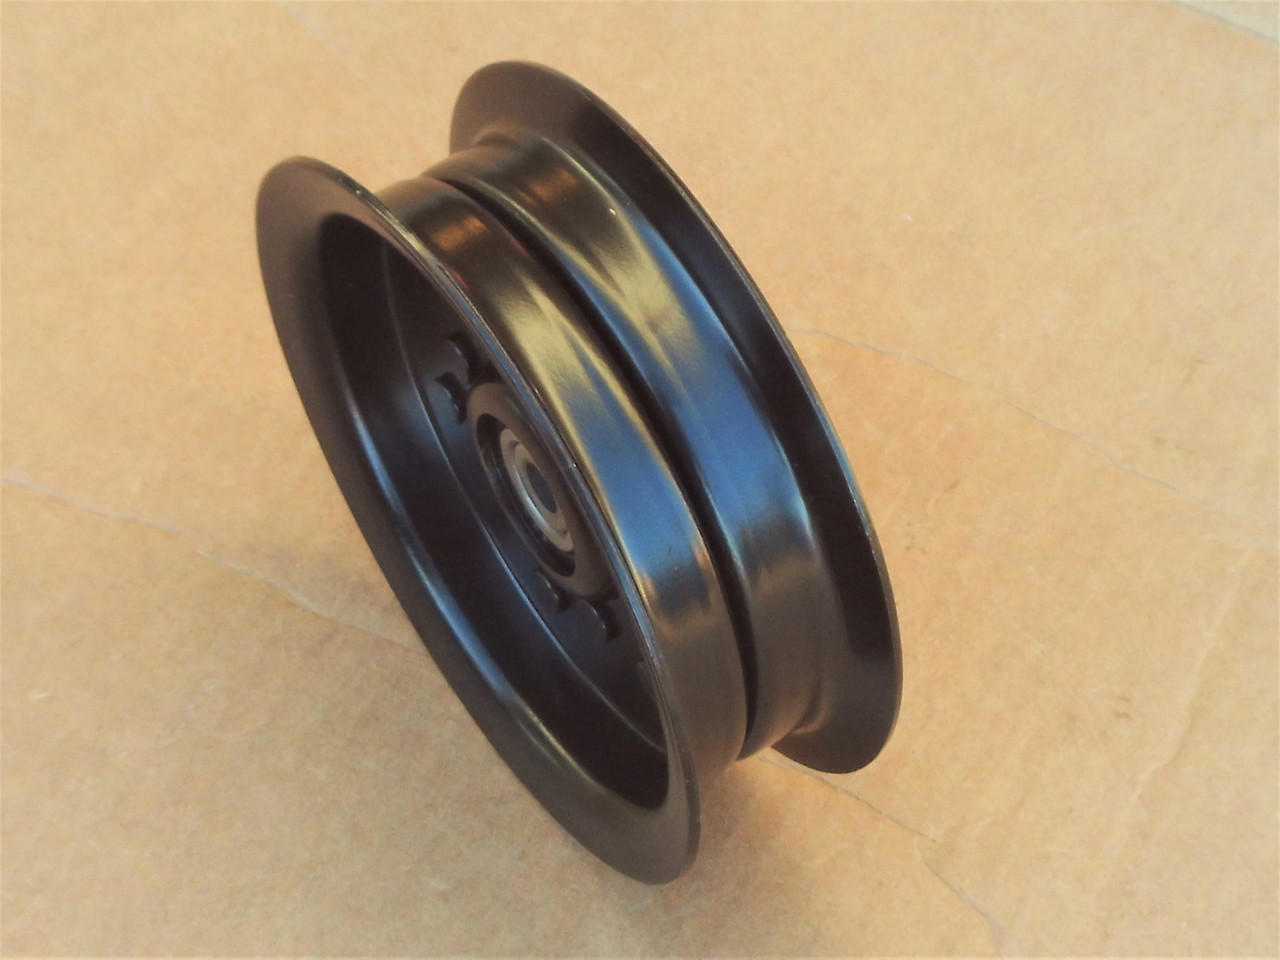 Idler Pulley for AYP, Craftsman 196106, 197379, 532196106 Height: 2" ID: 3/8" OD: 5-3/8"